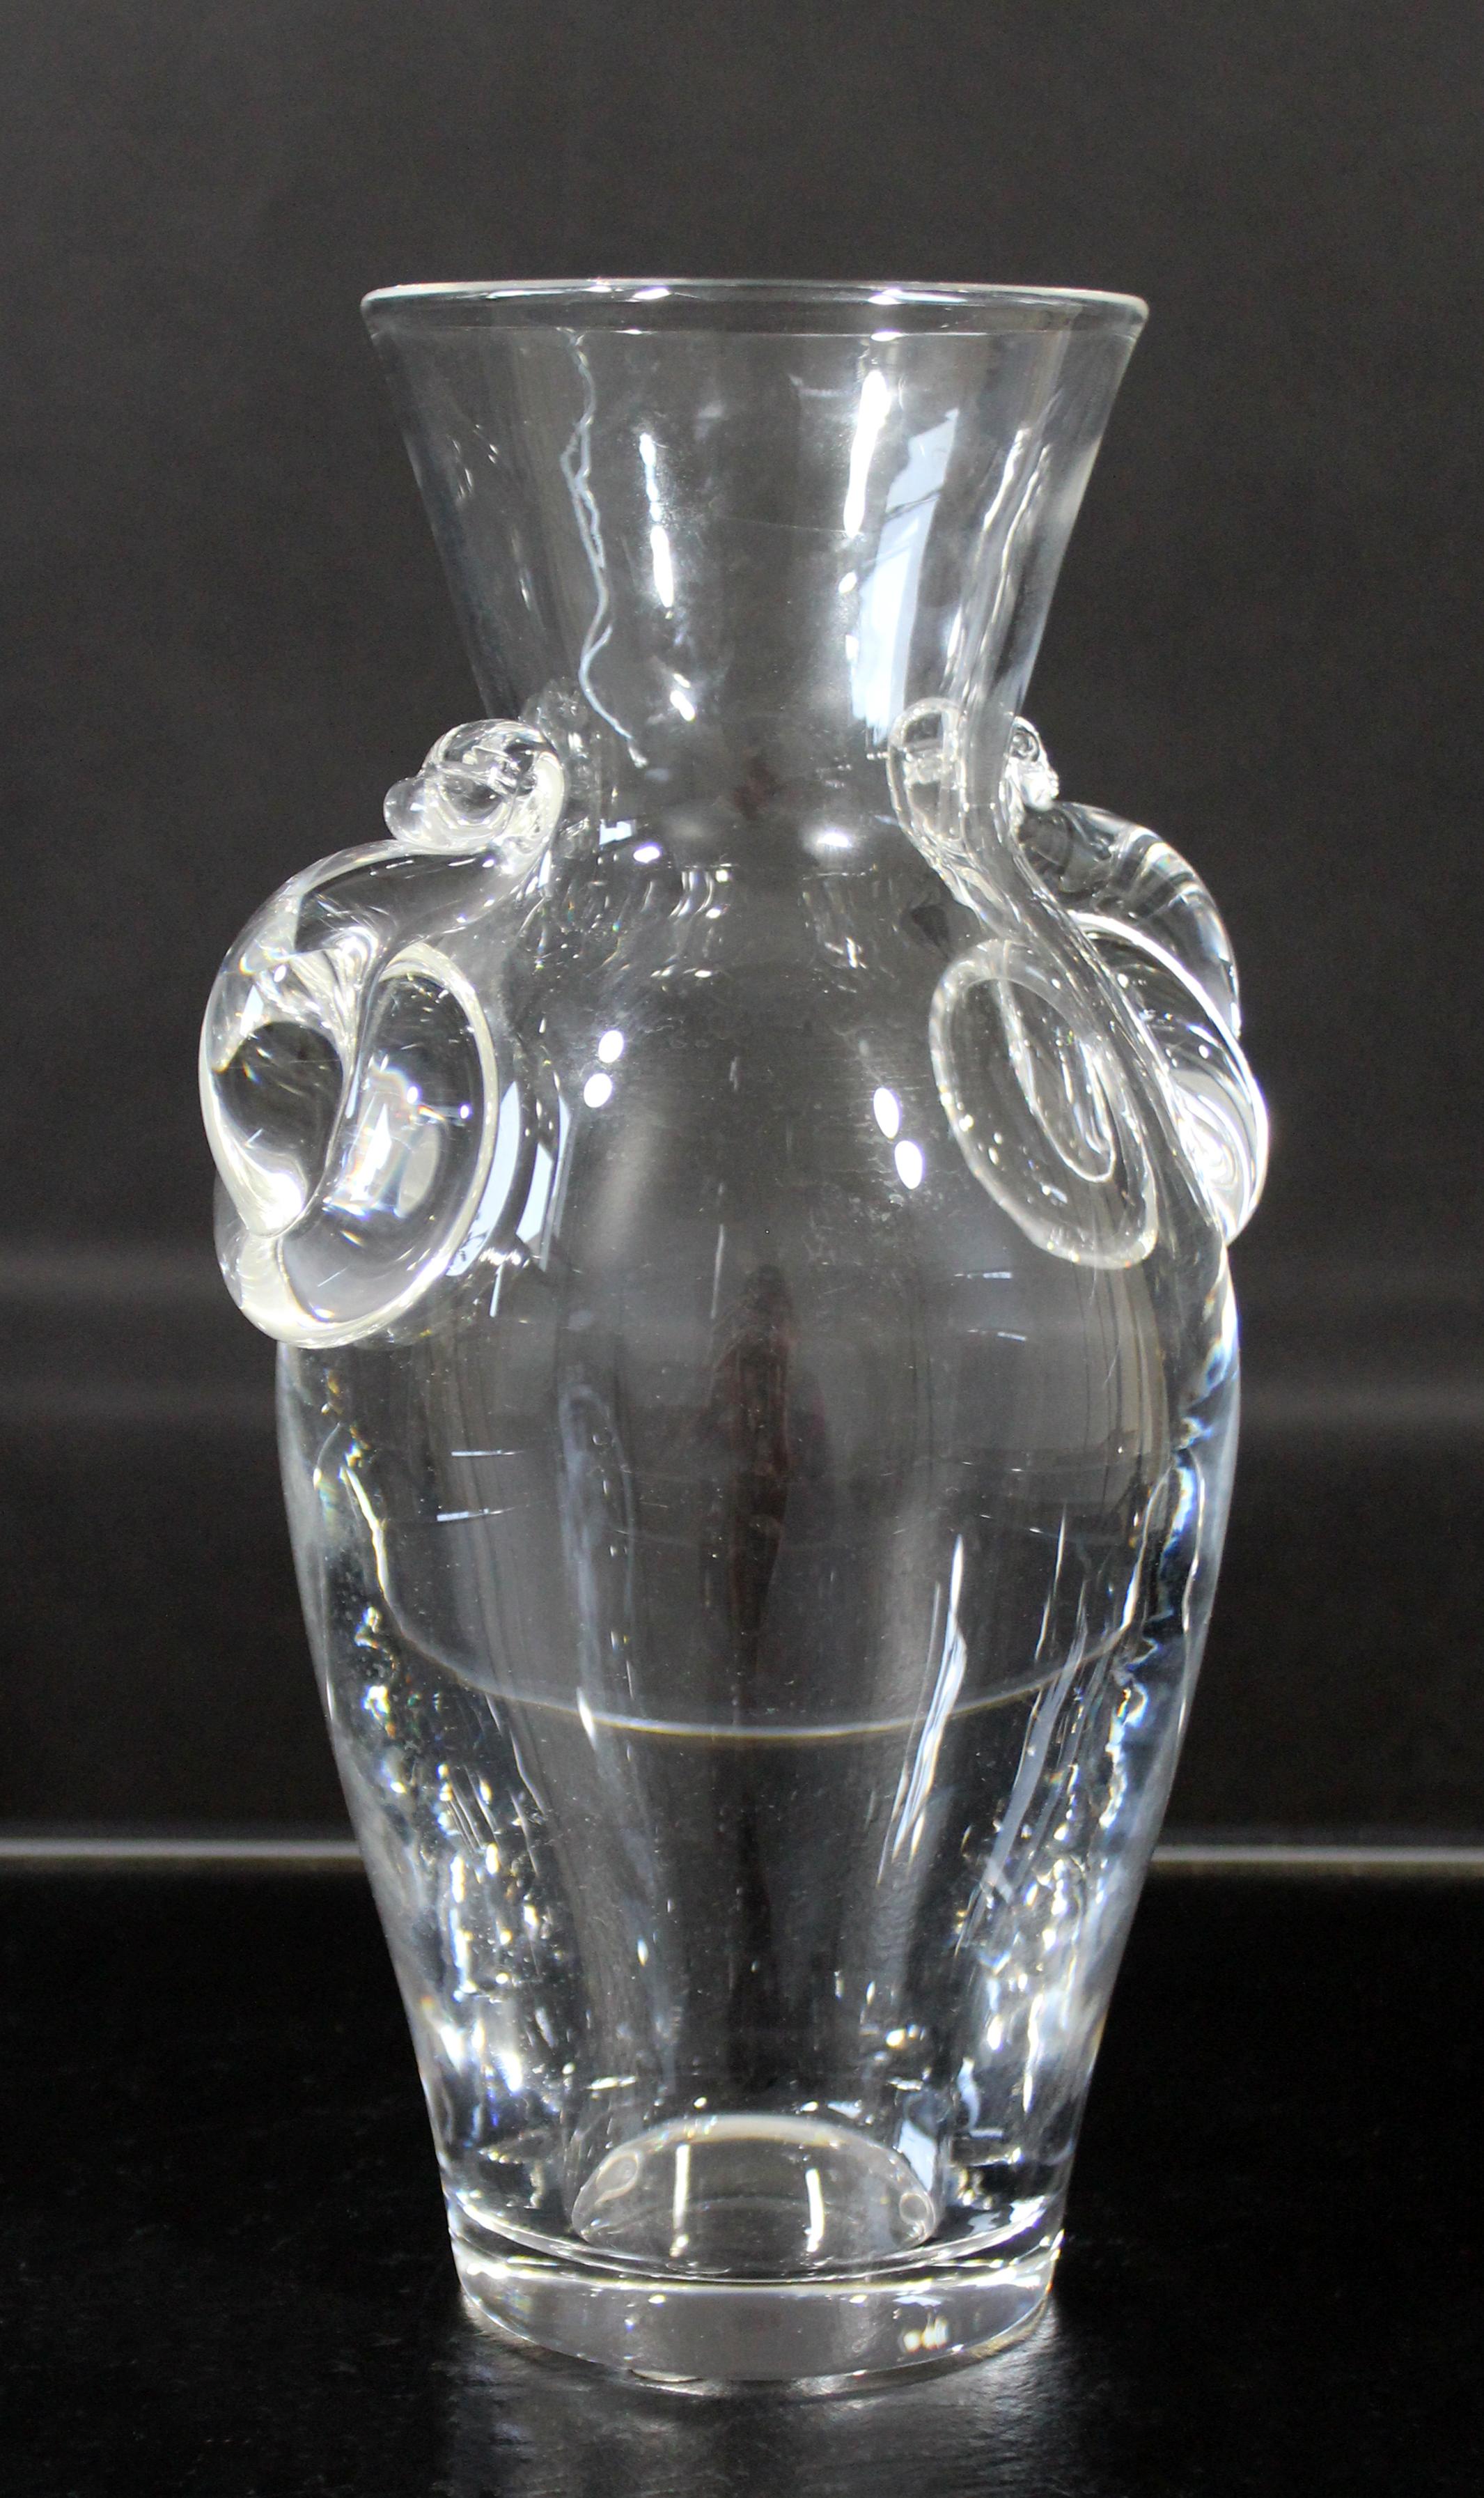 For your consideration is a stunning, Steuben glass, ring handle, art vase, by Lloyd Atkins, circa 1950s. In excellent condition. The dimensions are 5